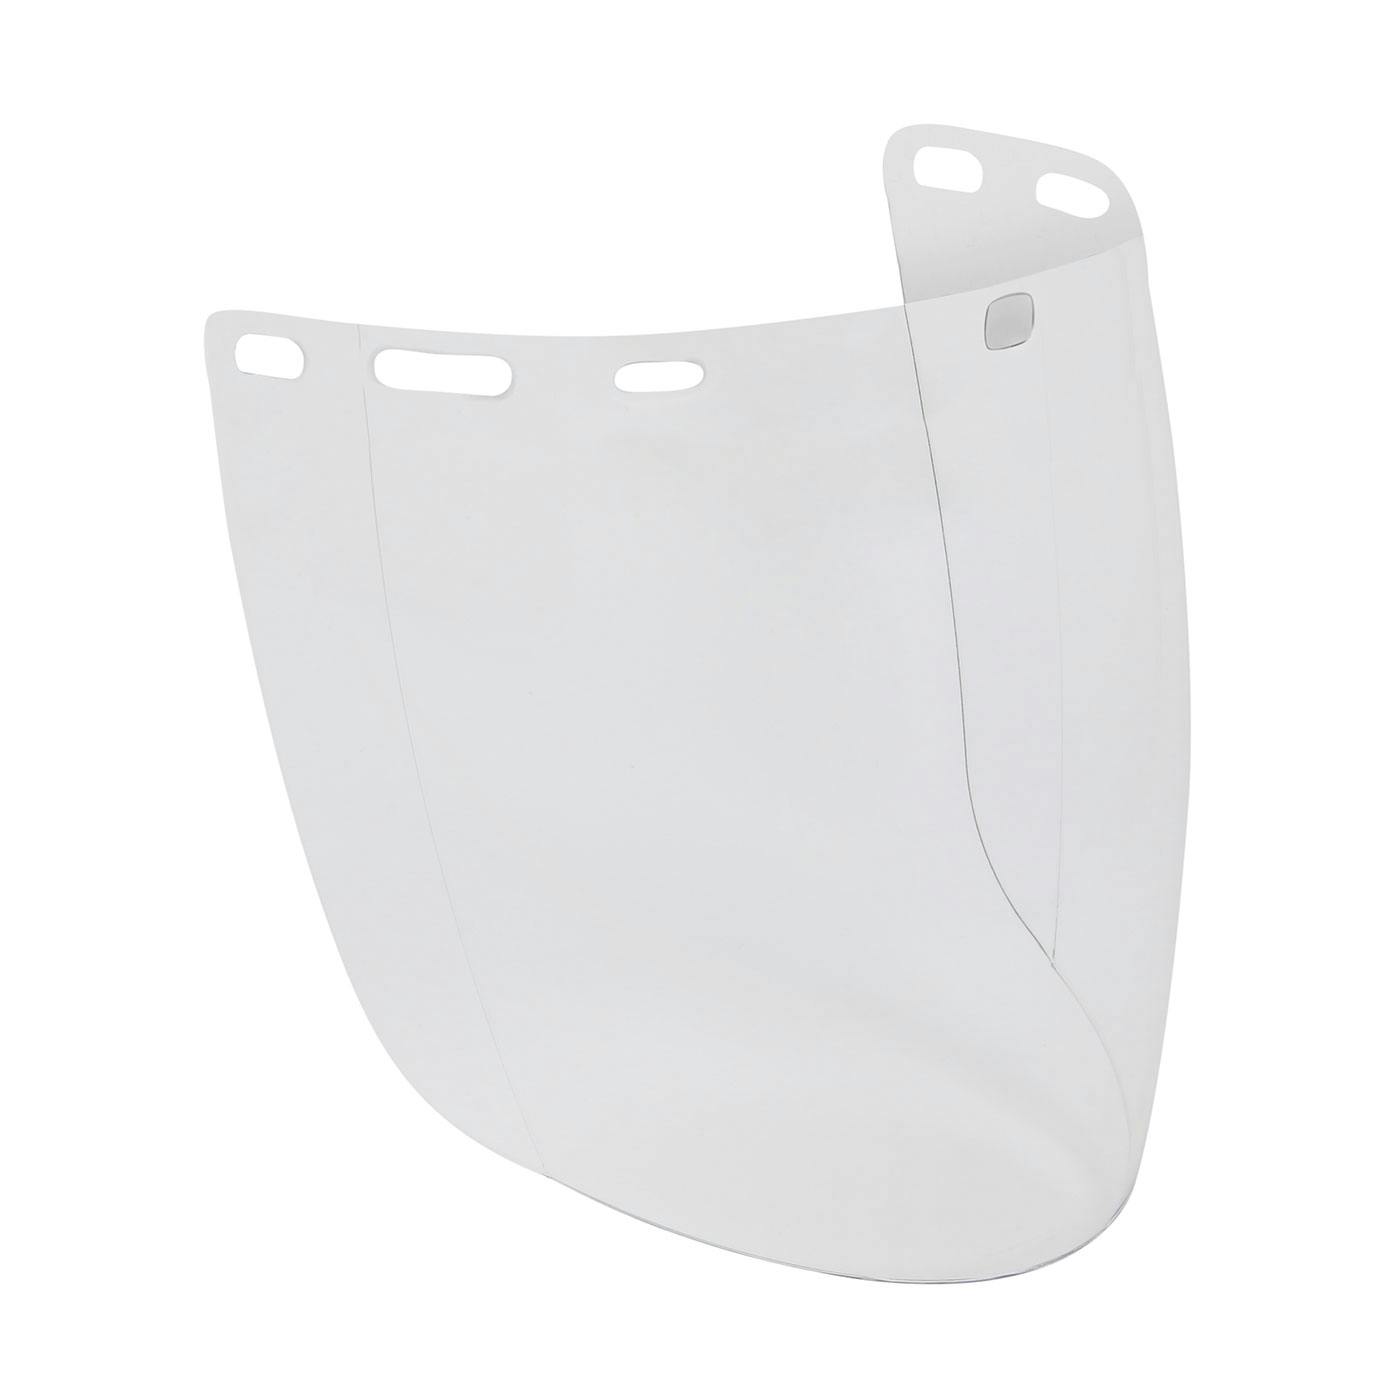 Uncoated Aspherical Polycarbonate Safety Visor - Clear, Clear (251-01-7401) - OS_1